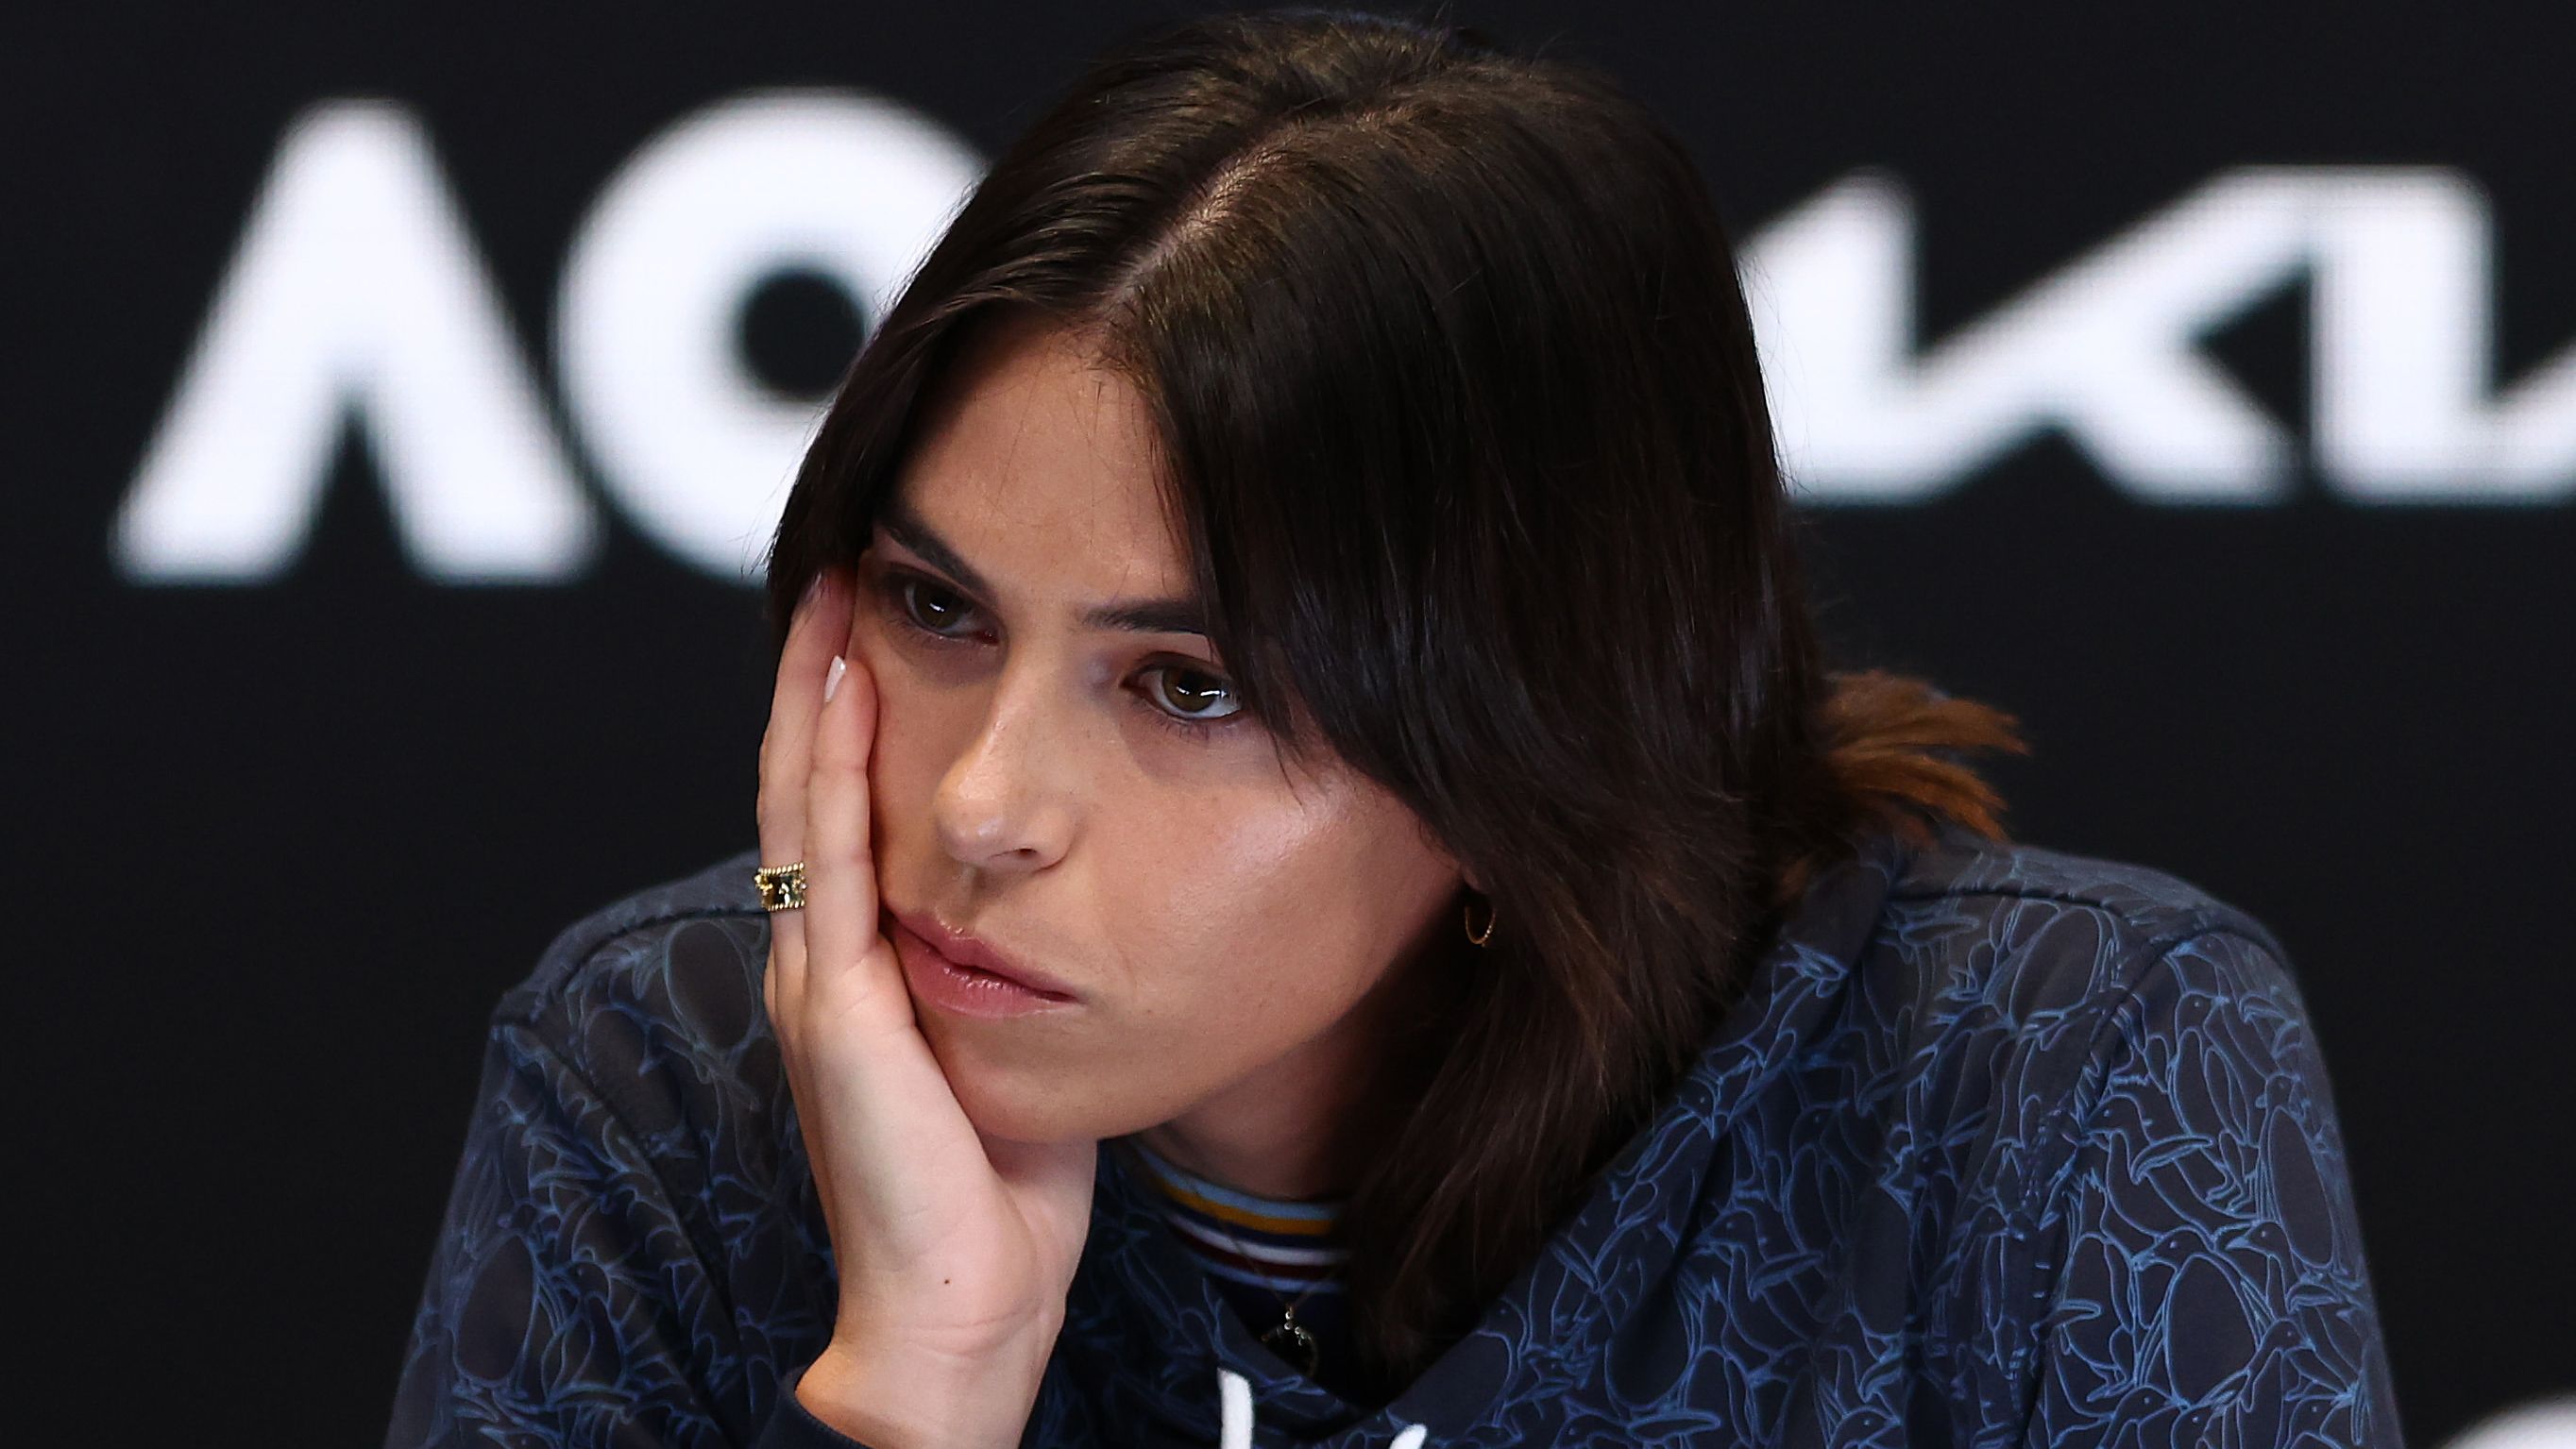 A teary Ajla Tomljanovic speaks to the media during a press conference after pulling out of the 2023 Australian Open.